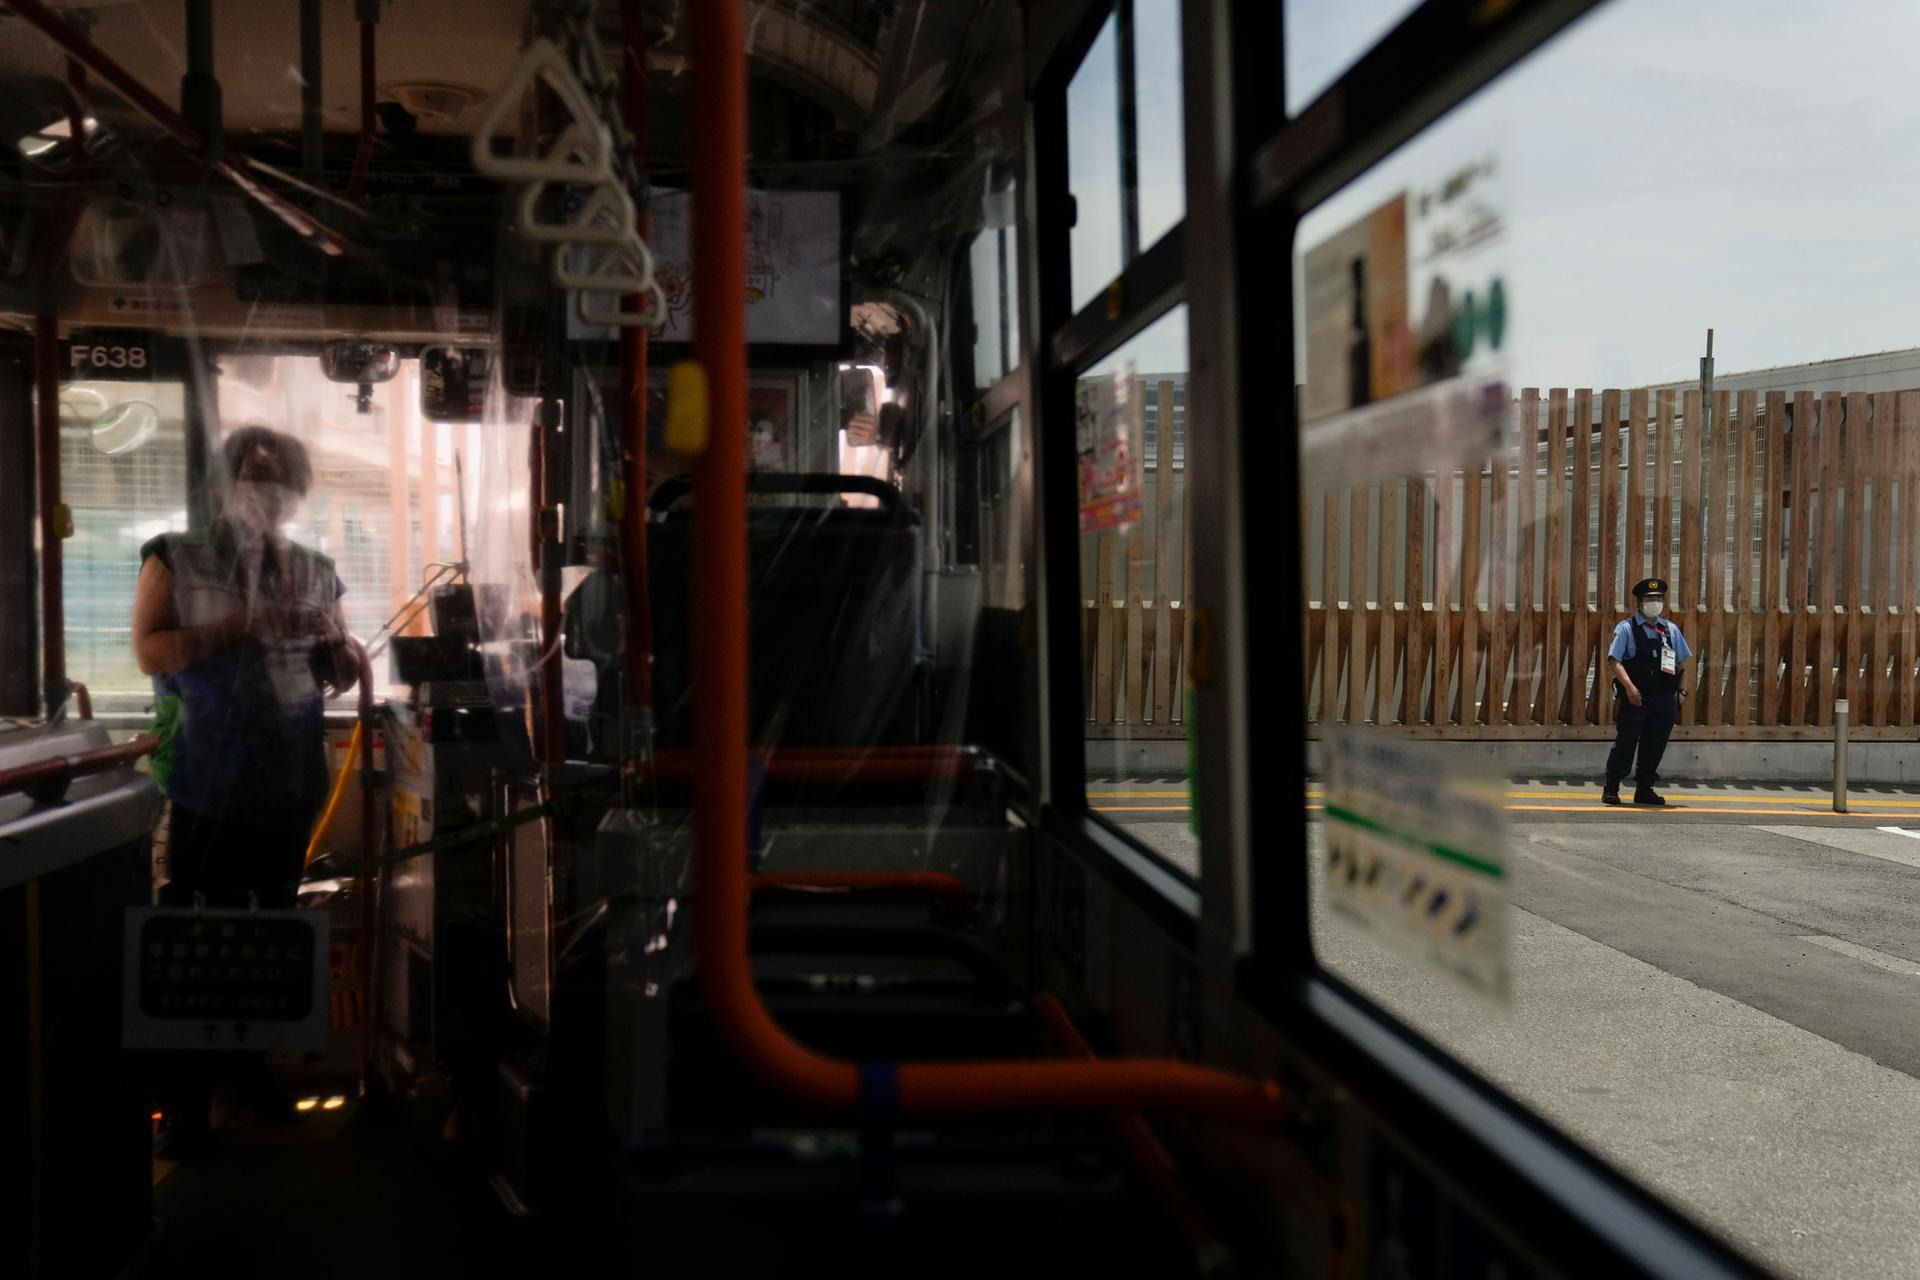 A police office is shown through the window of a bus standing guard in front of a metal barrier.